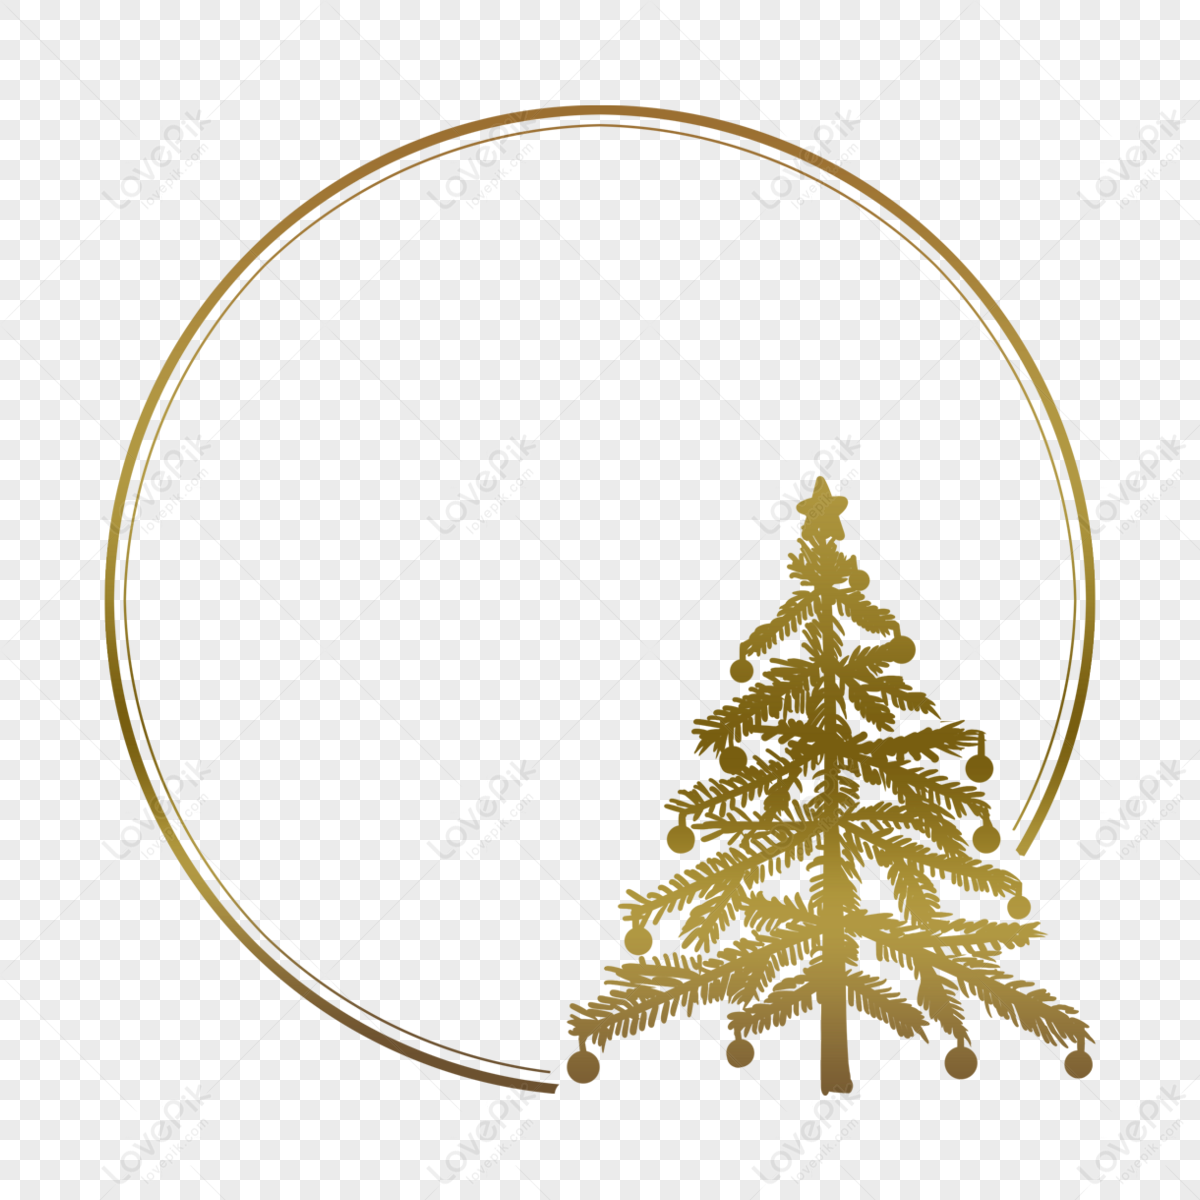 Brown Christmas tree silhouette circle border, Circle,  Christmas Tree,  Merry Christmas Border png transparent background